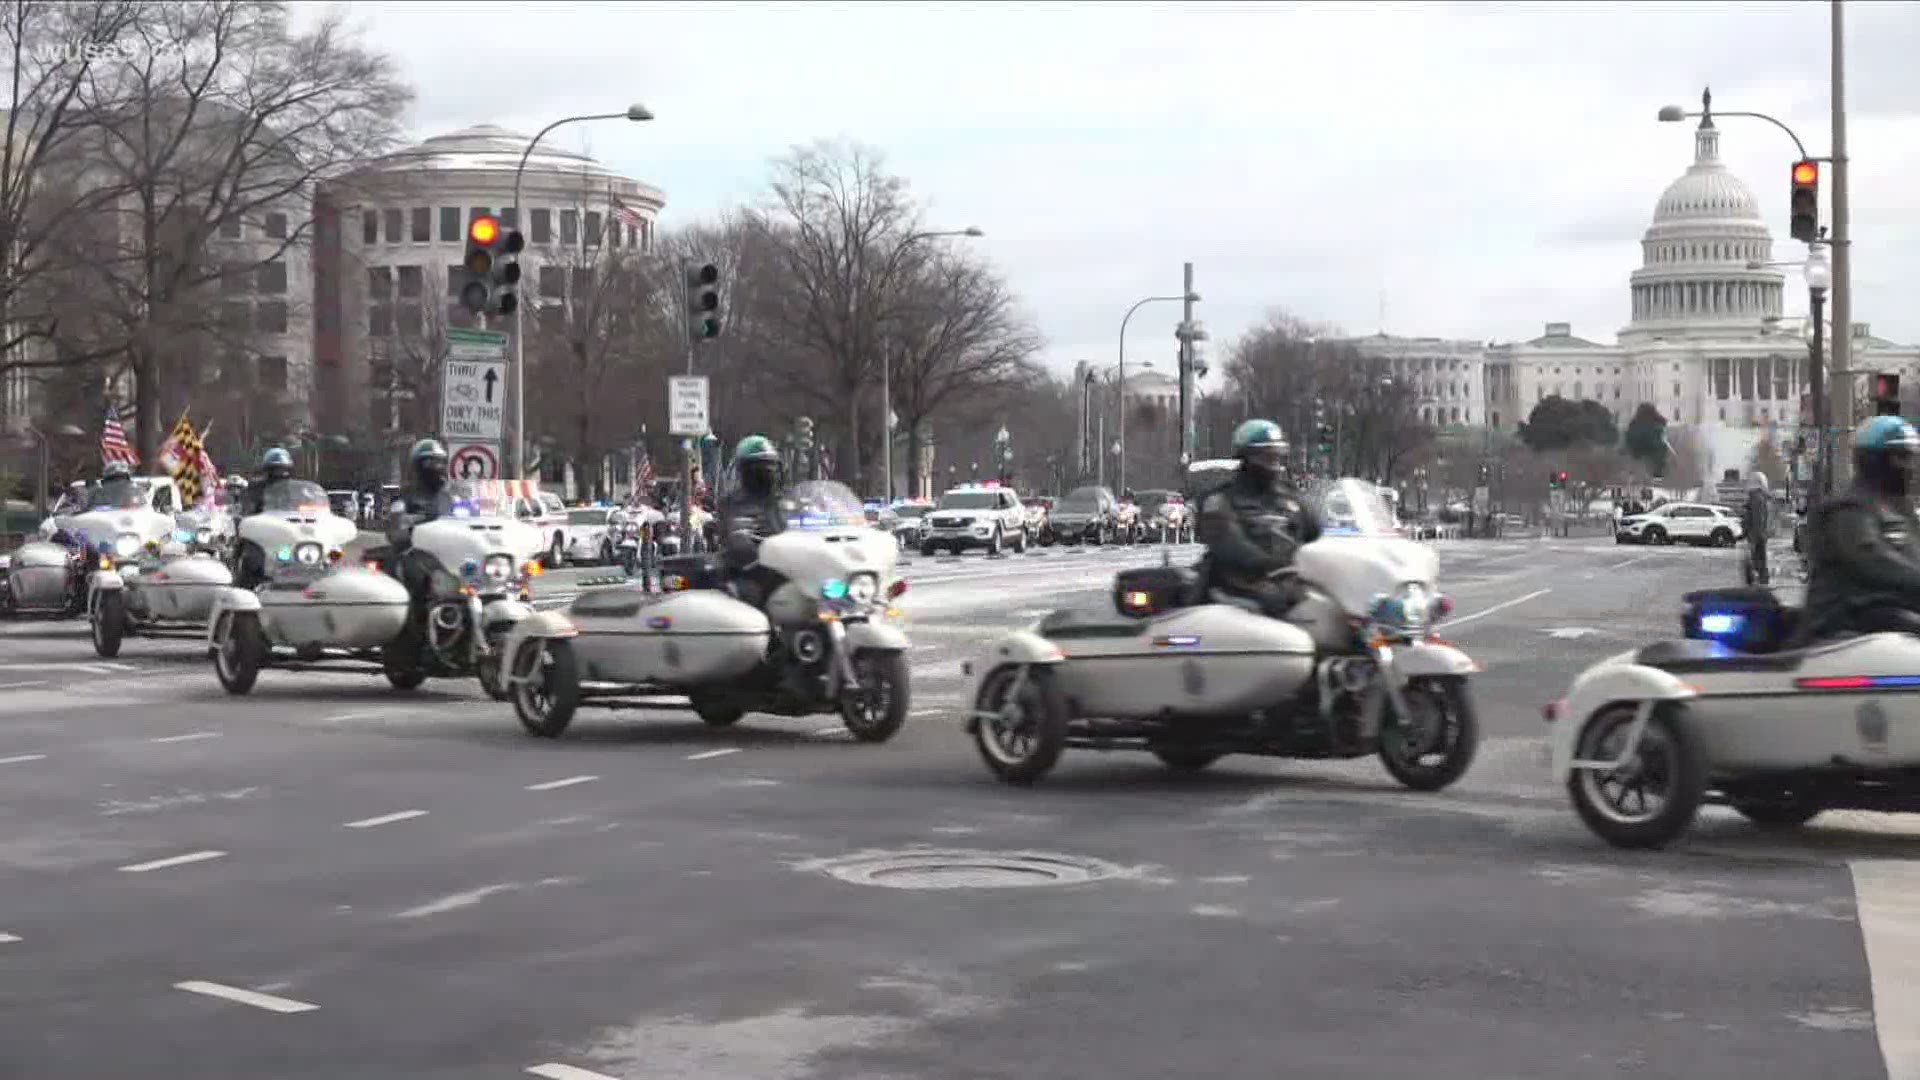 Officer Brian Sicknick's remains were led by a police motorcade from the U.S. Capitol to Arlington Cemetery to be laid to rest.